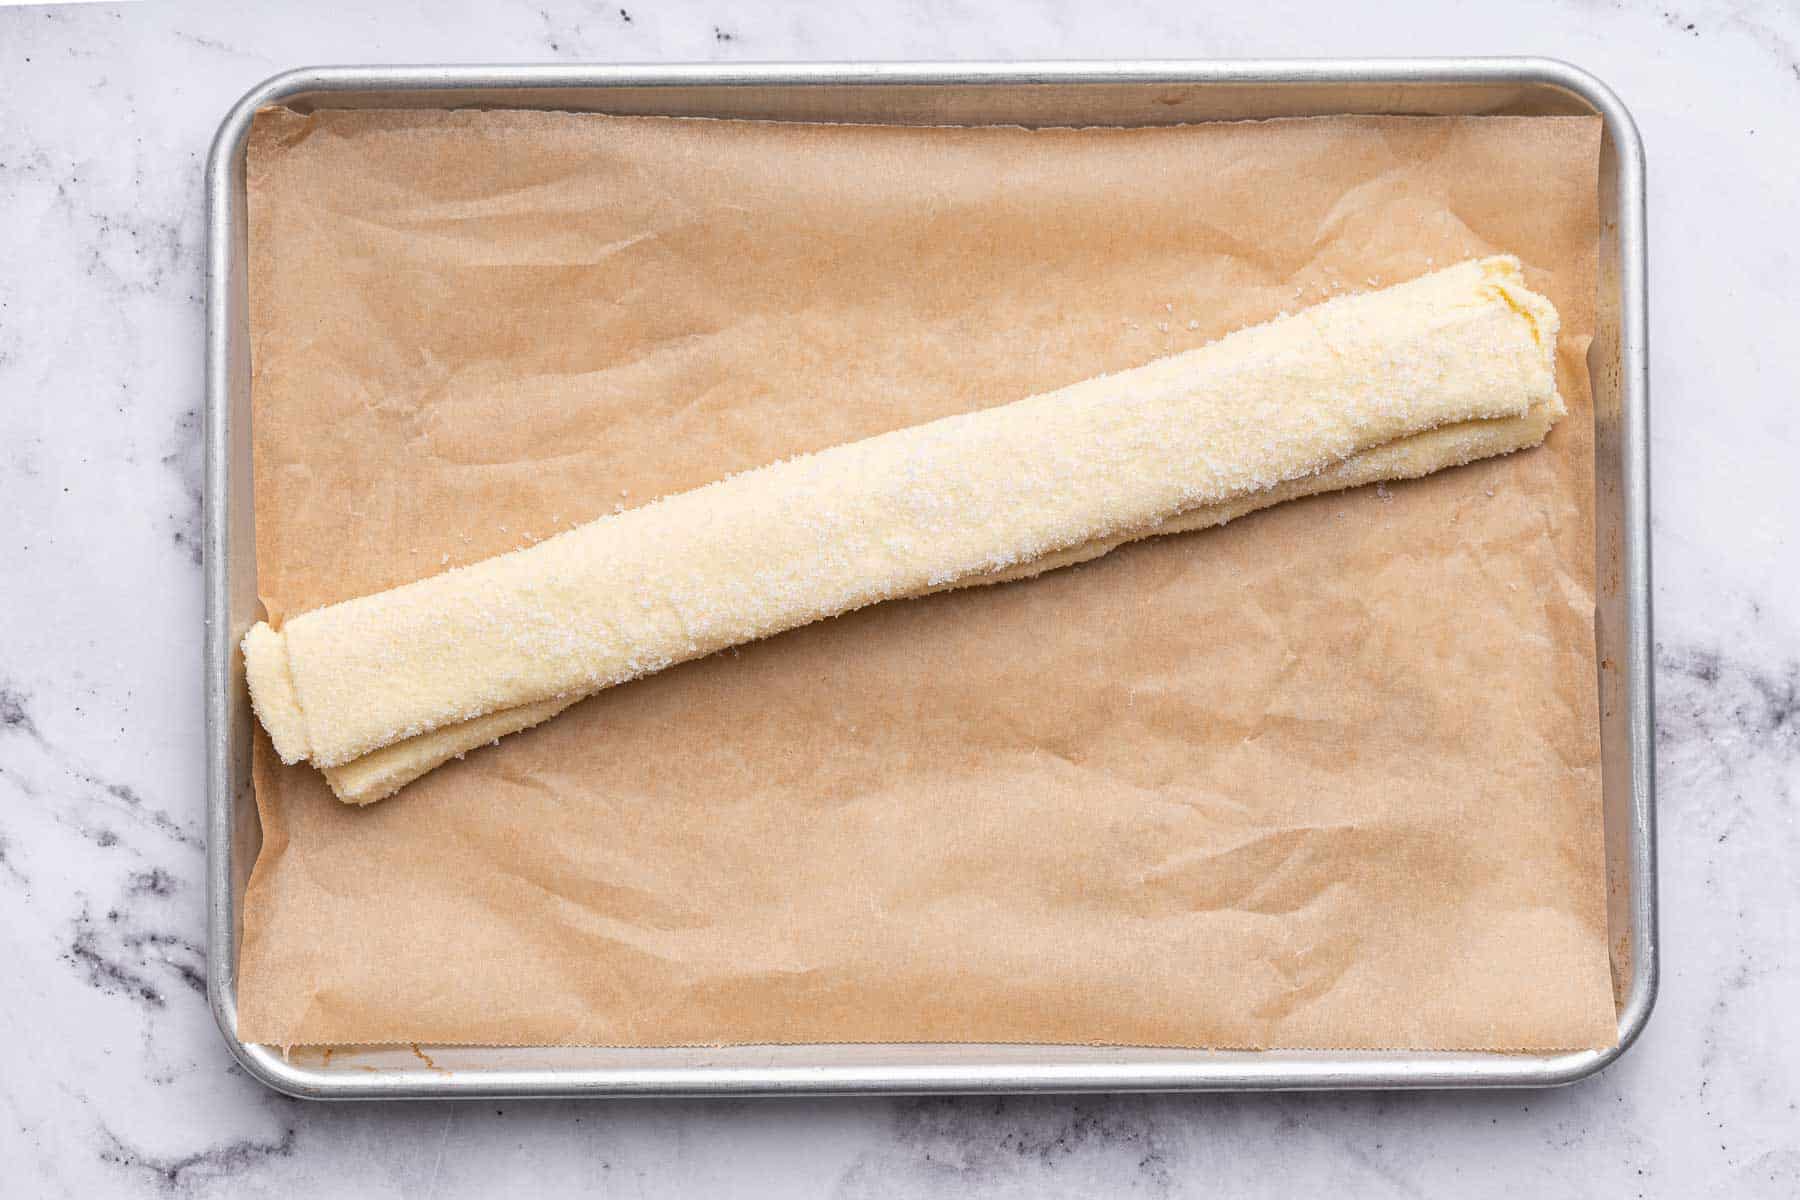 Roll of dough on cookie sheet with brown parchment paper underneath.